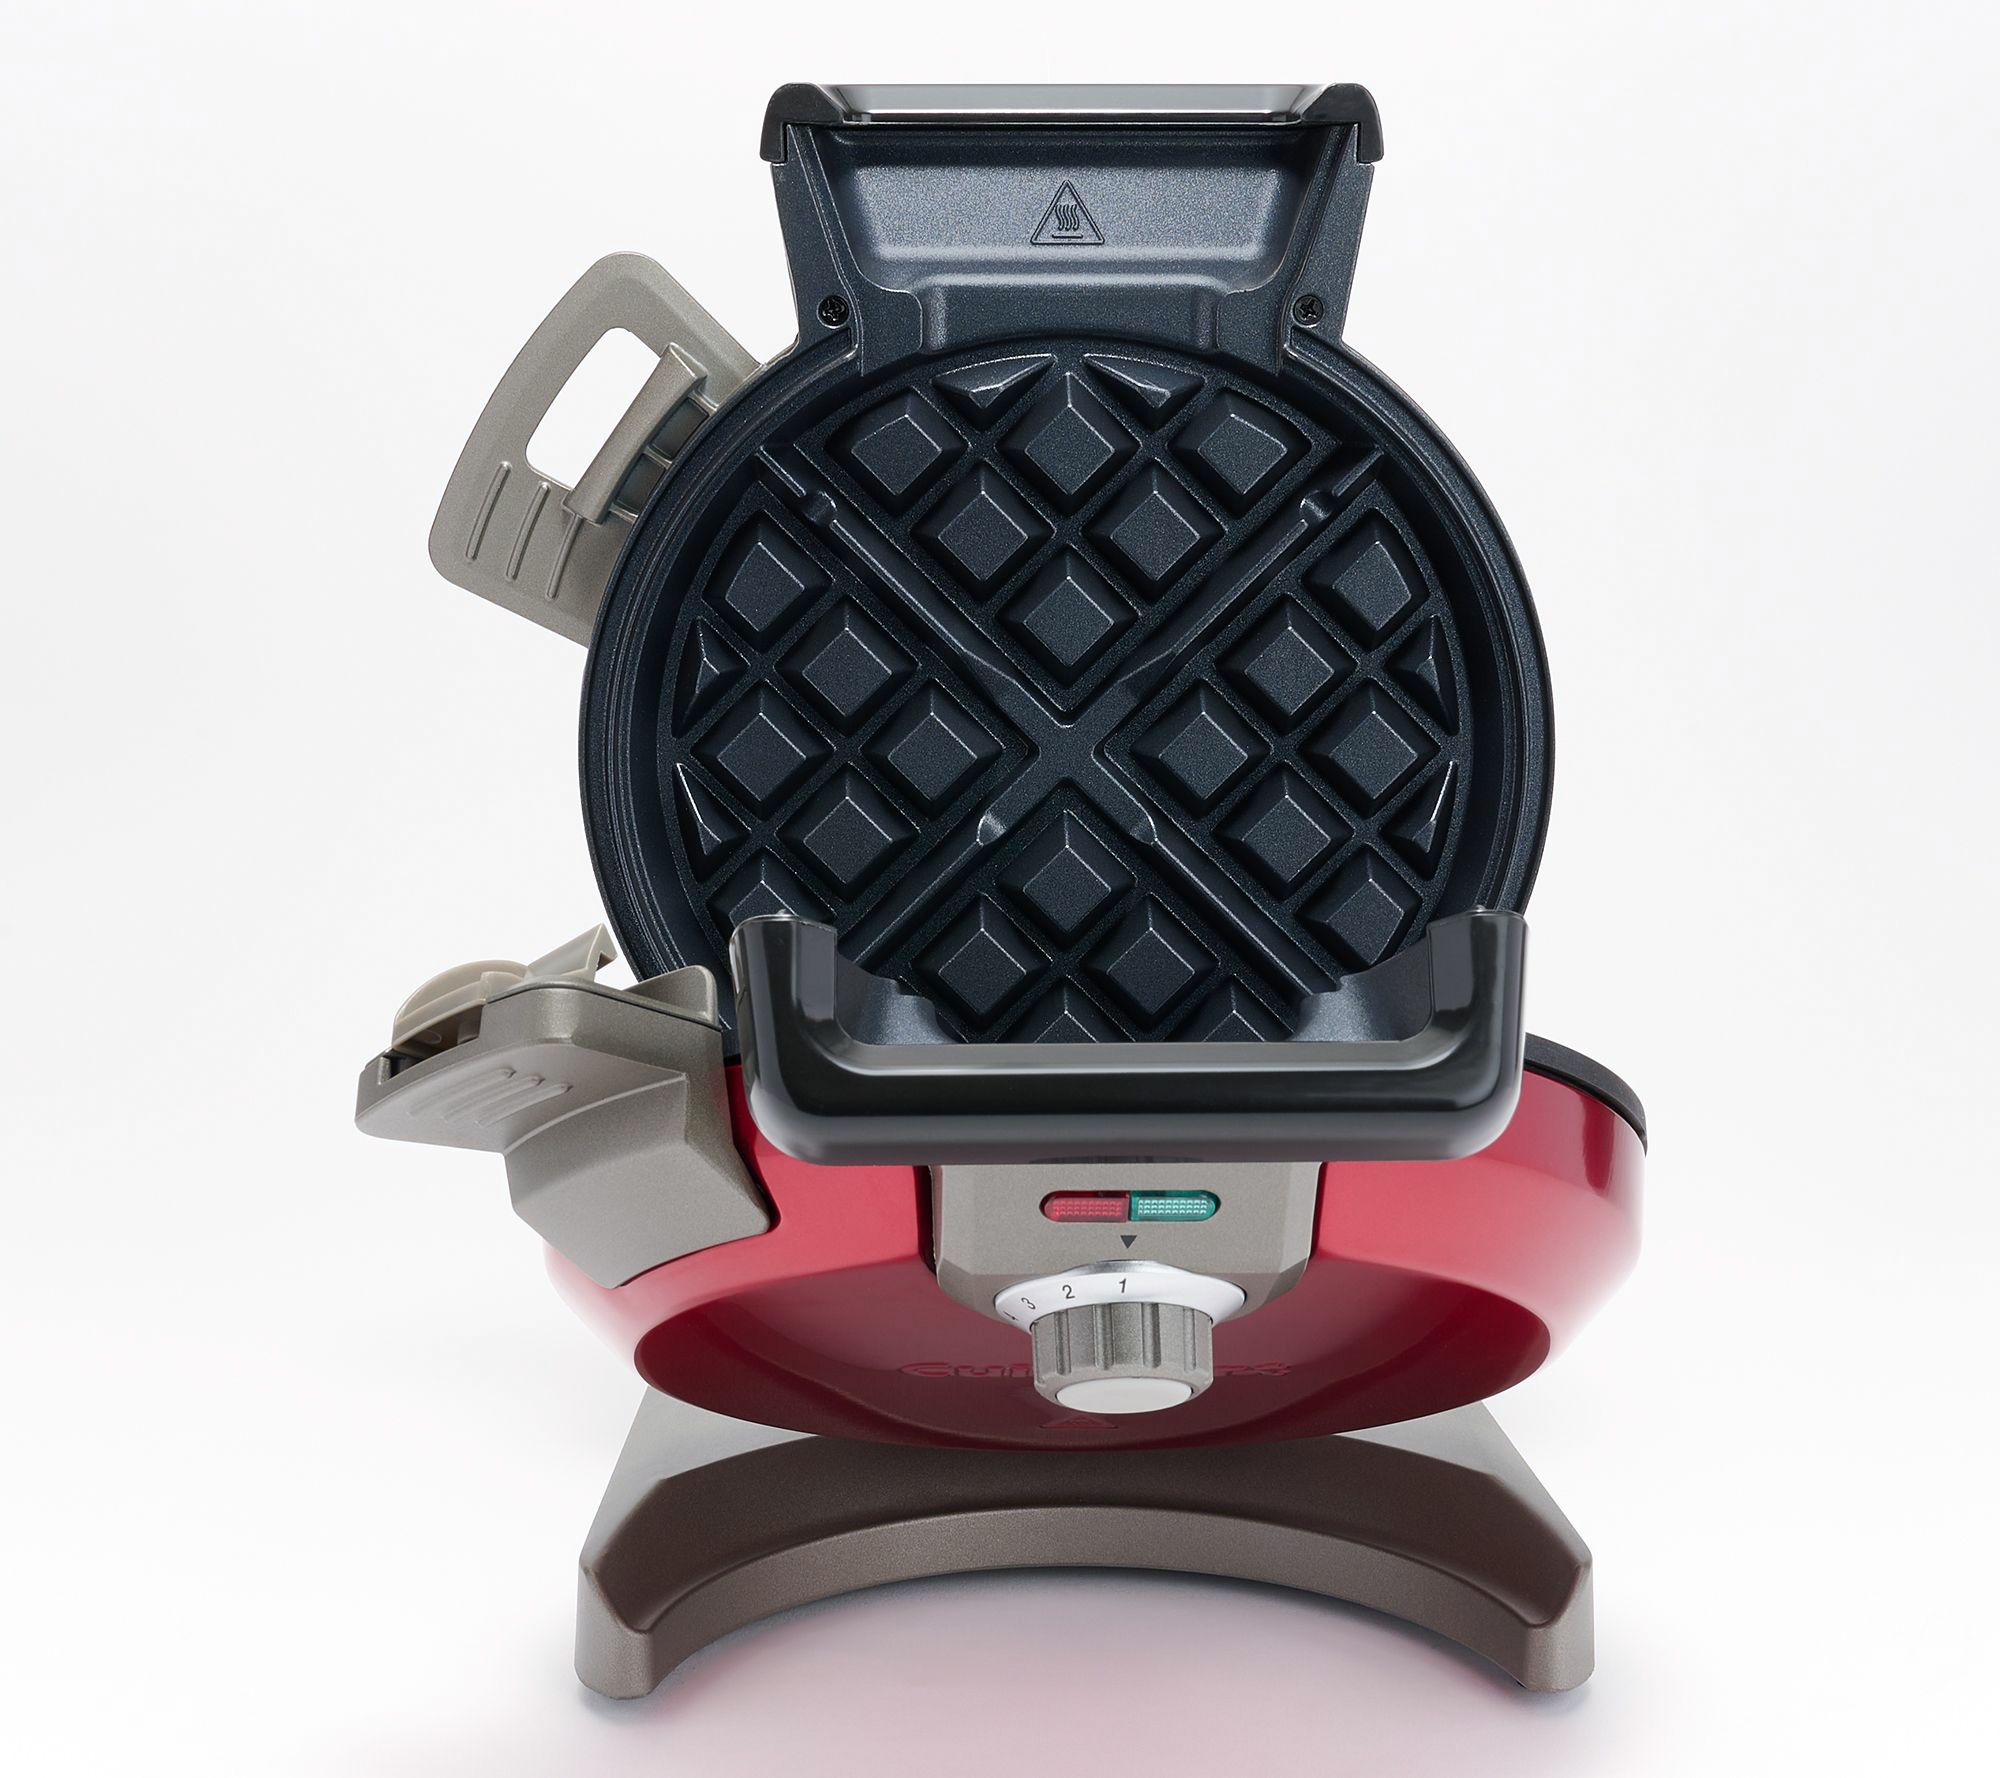 Cuisinart Vertical Waffle Maker Review: It's one stand-up kitchen gadget